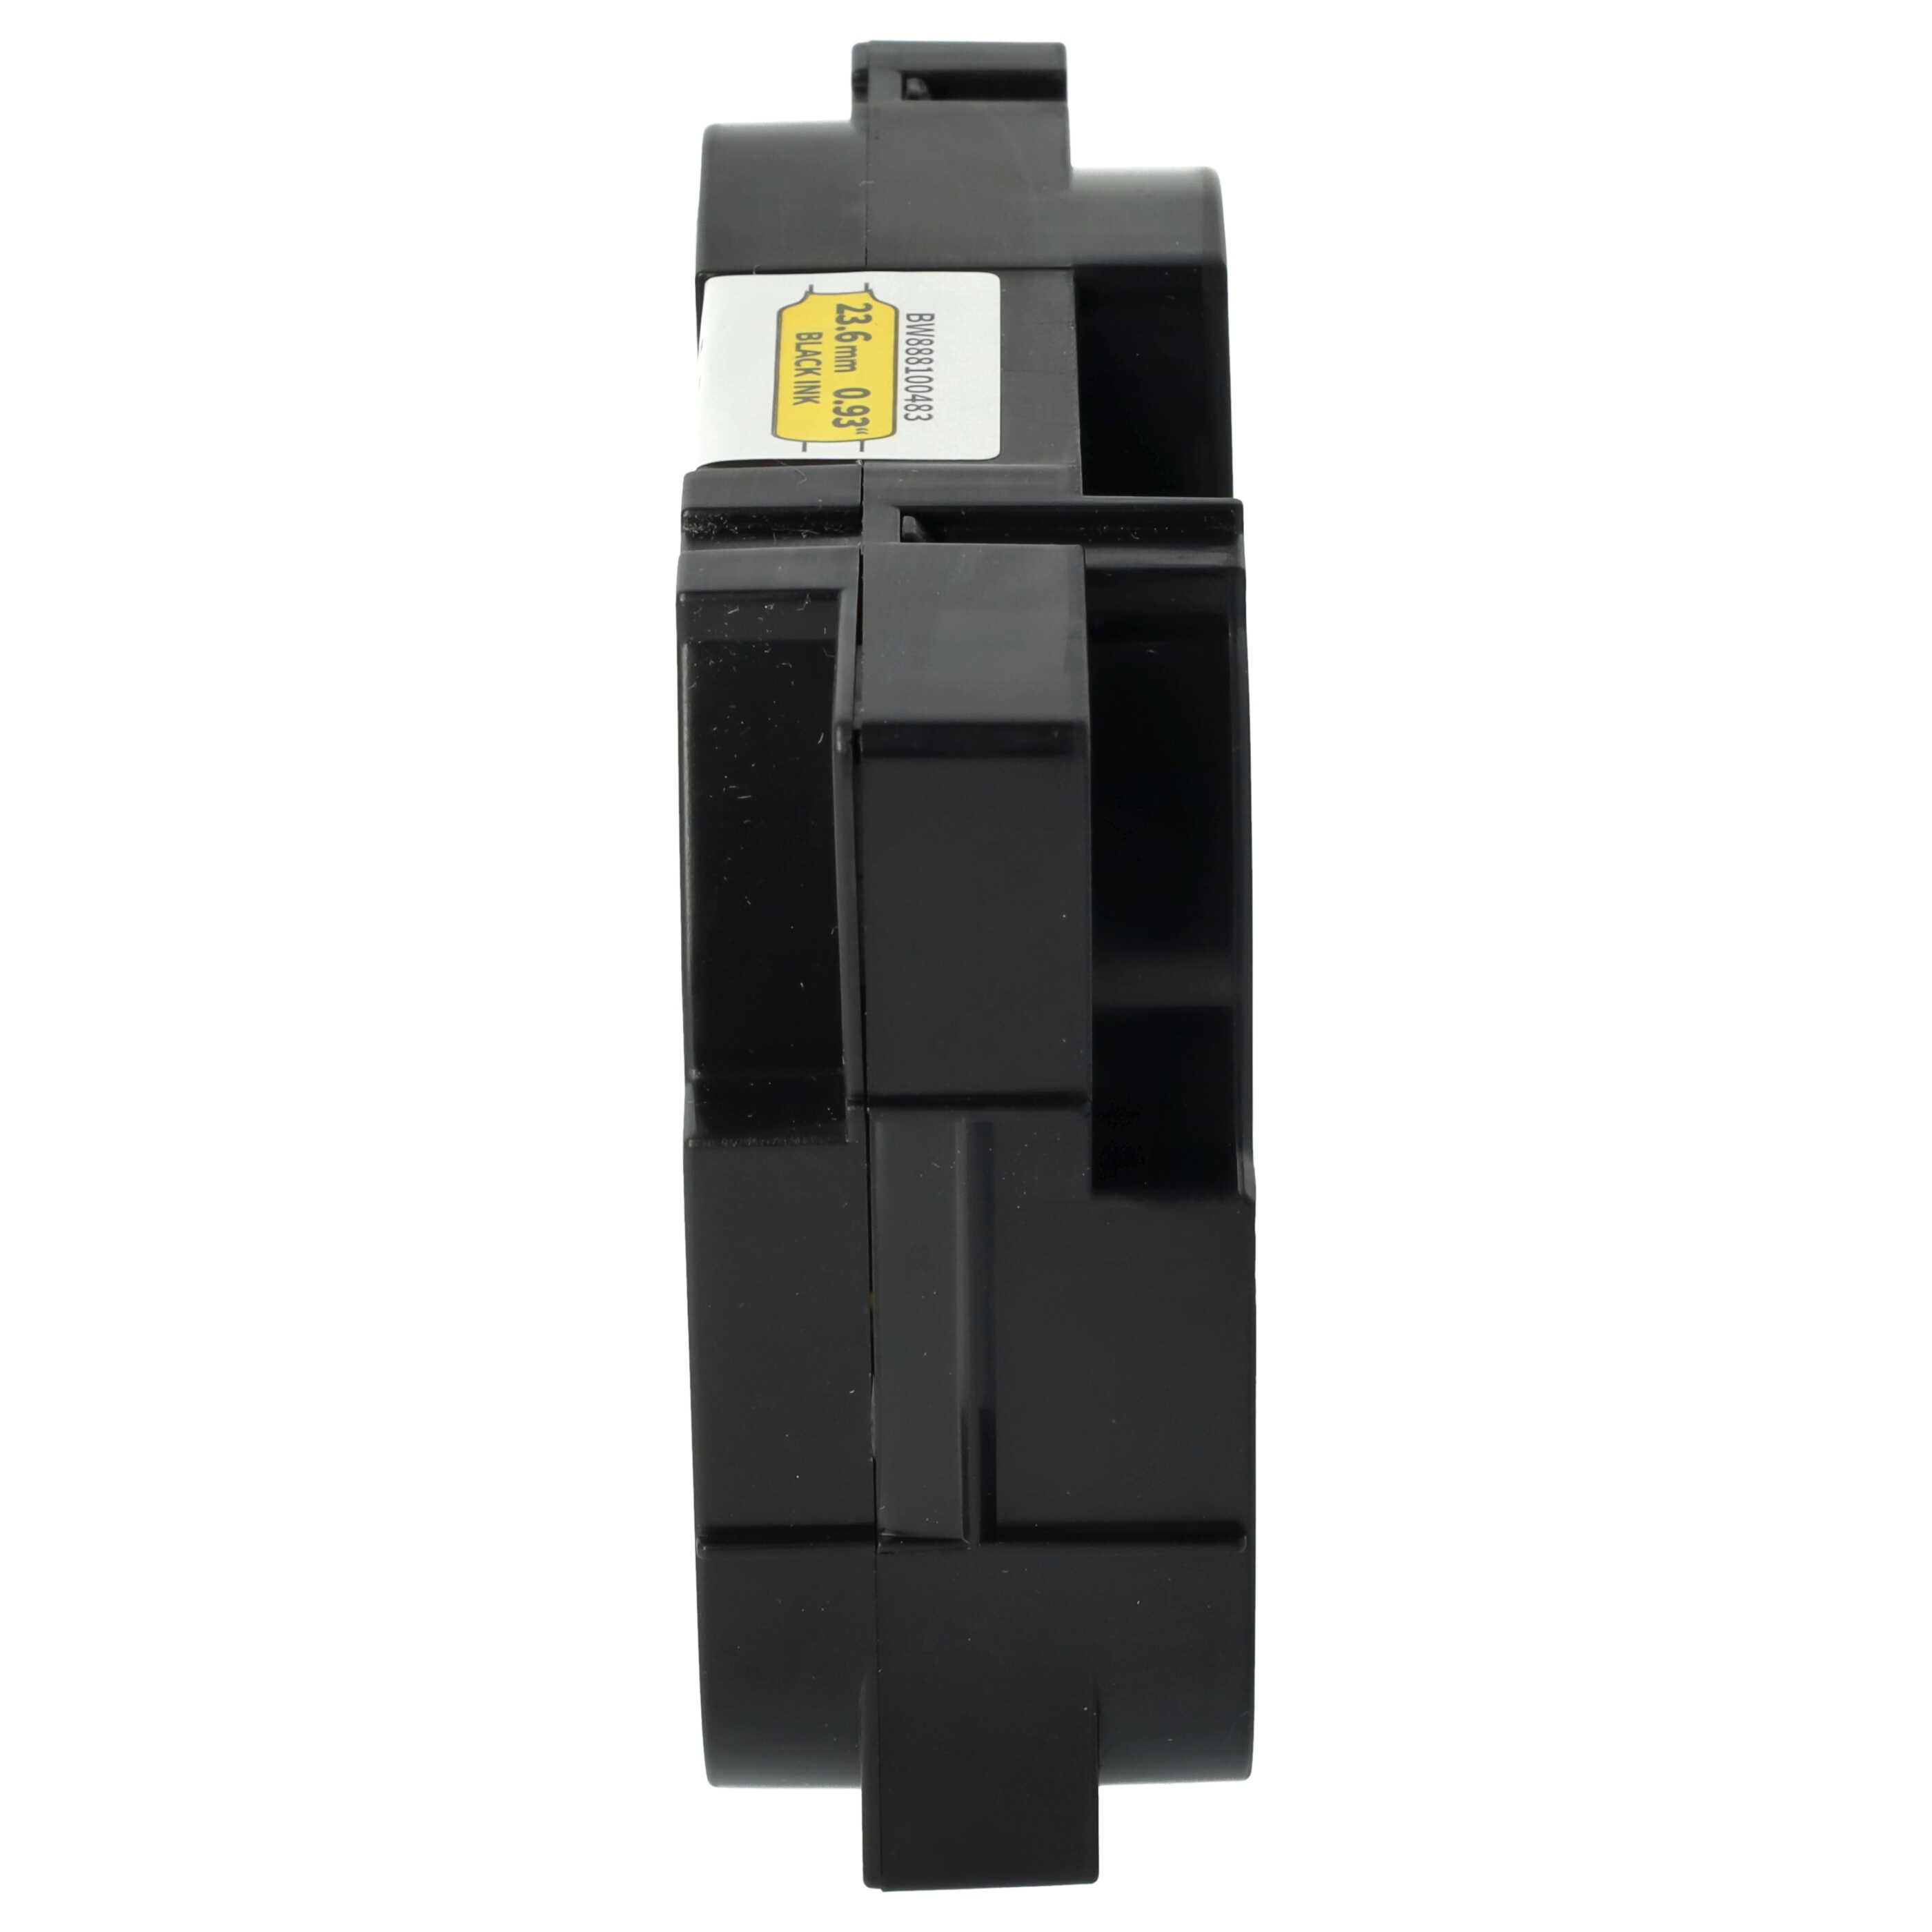 Label Tape as Replacement for Brother AHS-651, HS-651, HSe651, HS651 - Black to Yellow, Heat Shrink Tape